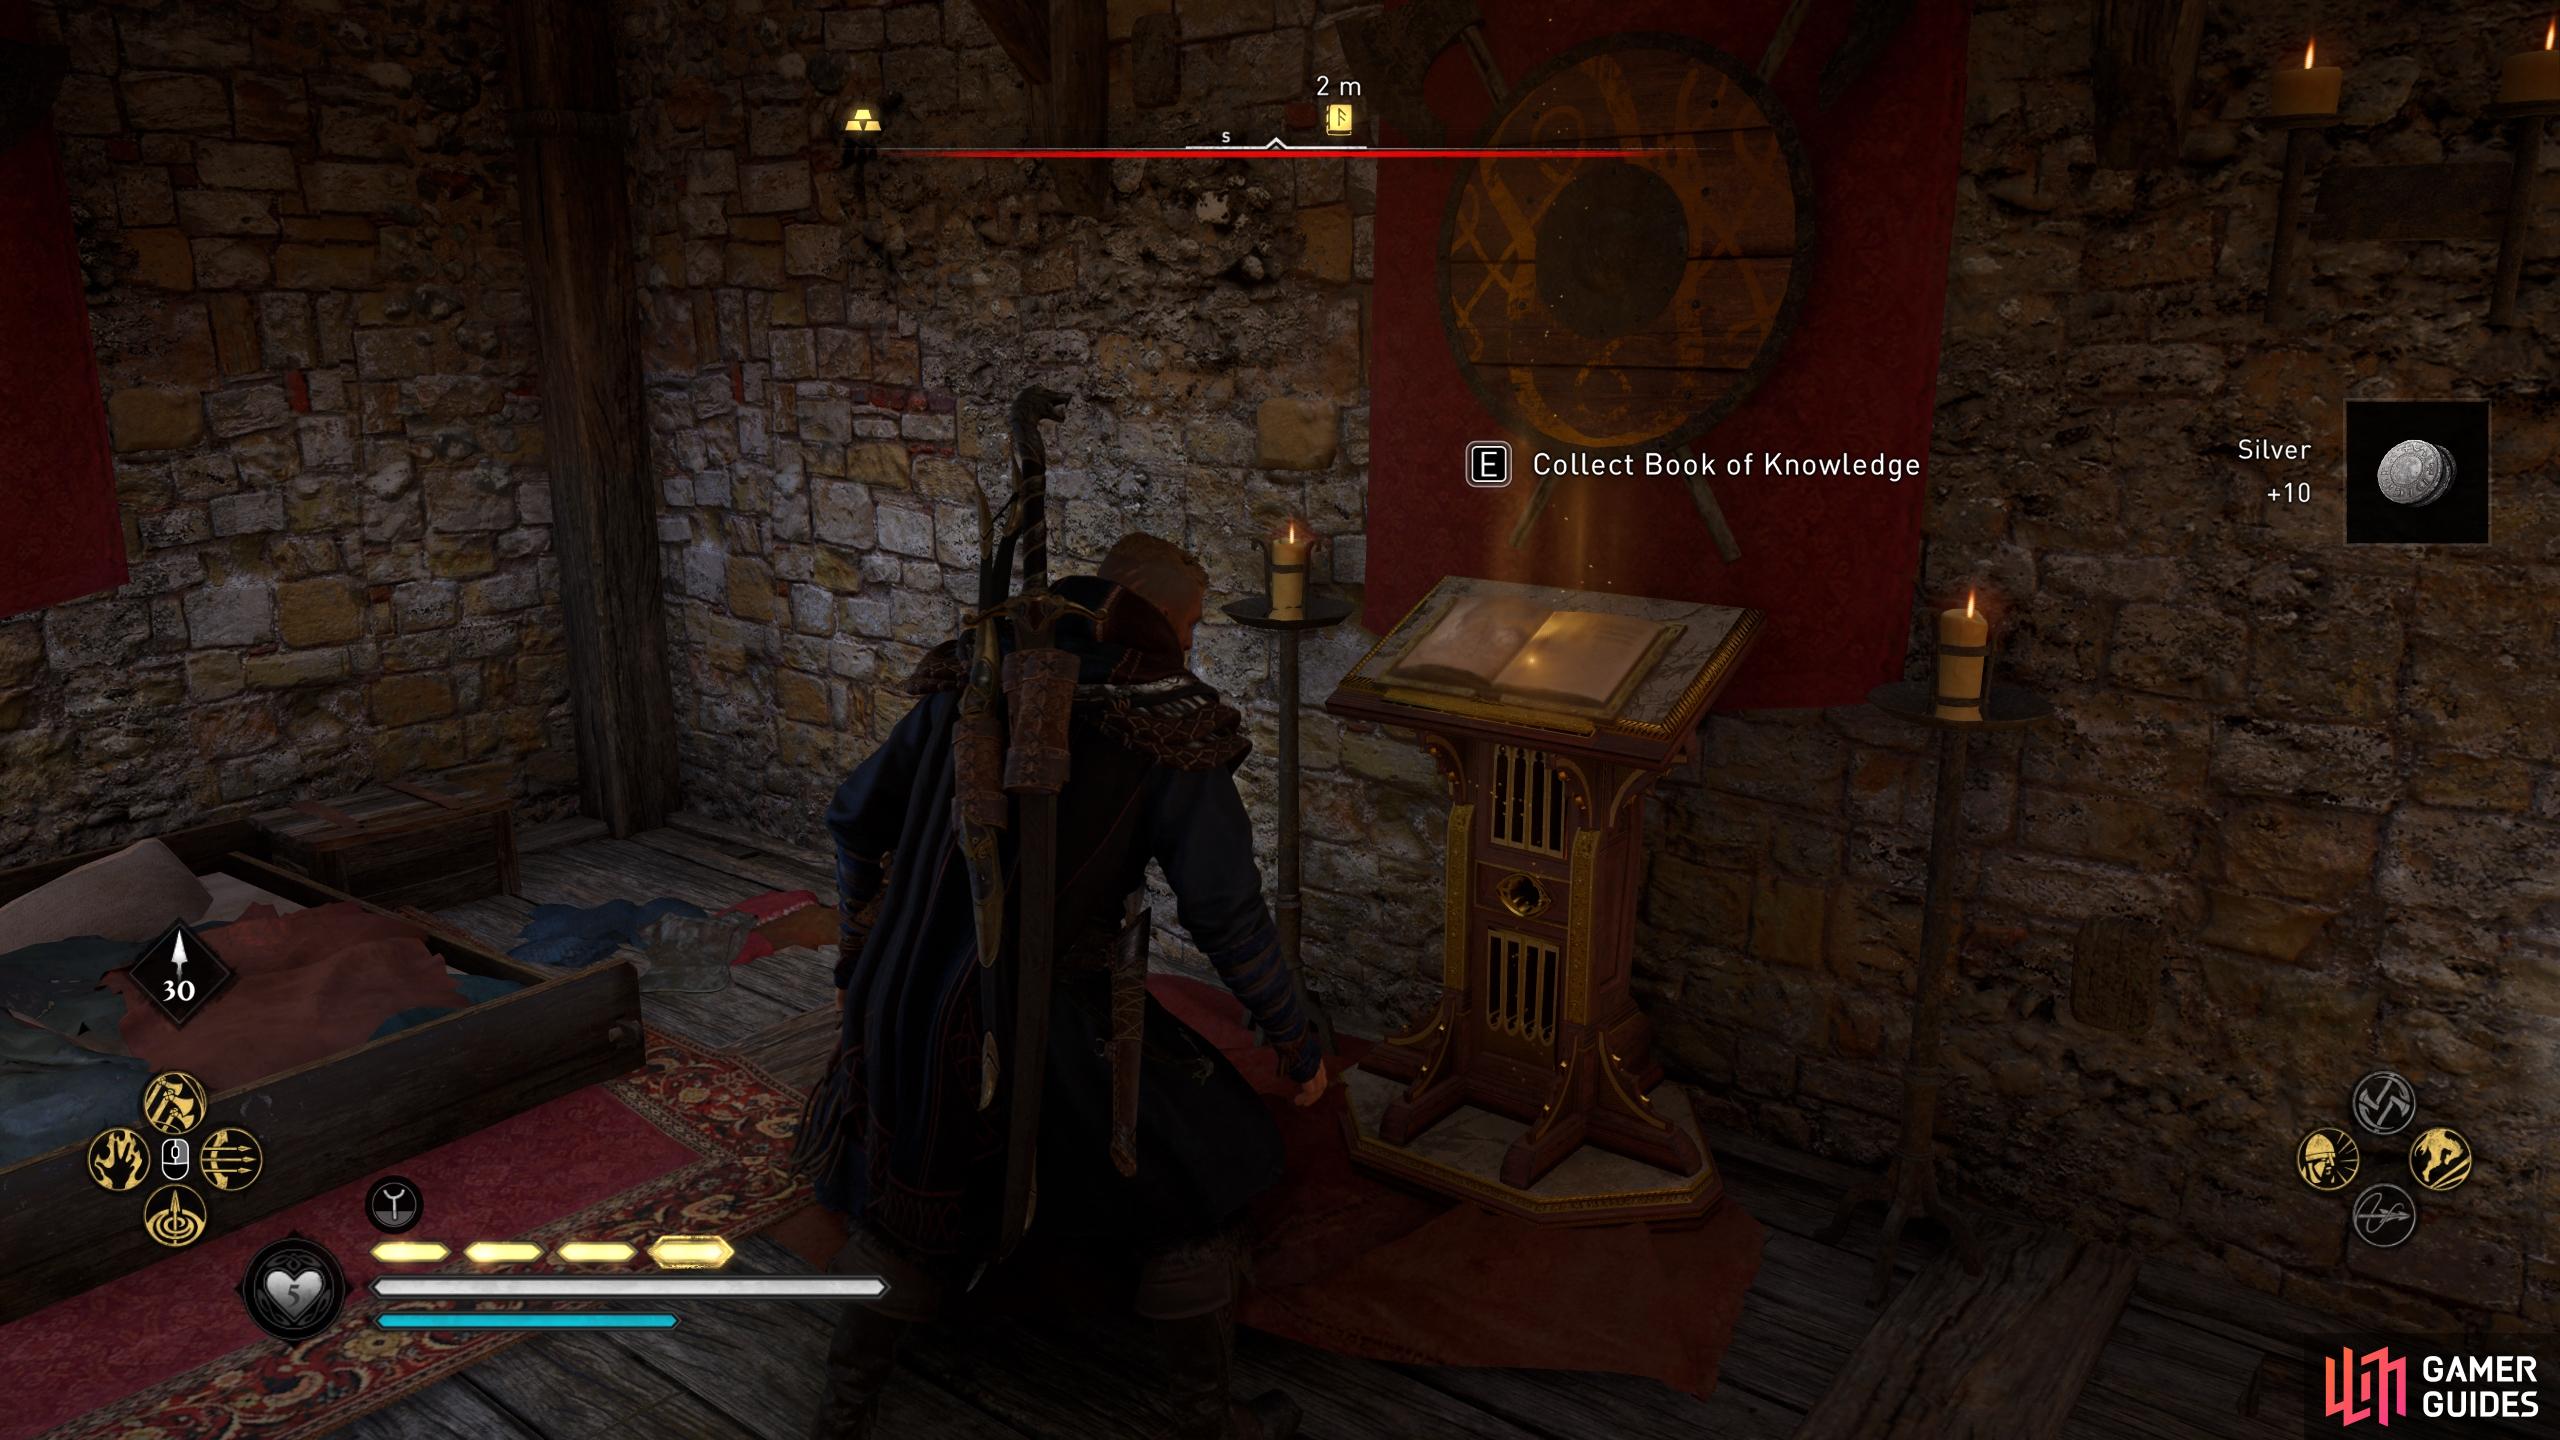 Youll find the book of knowledge in the room at the top of the tower.